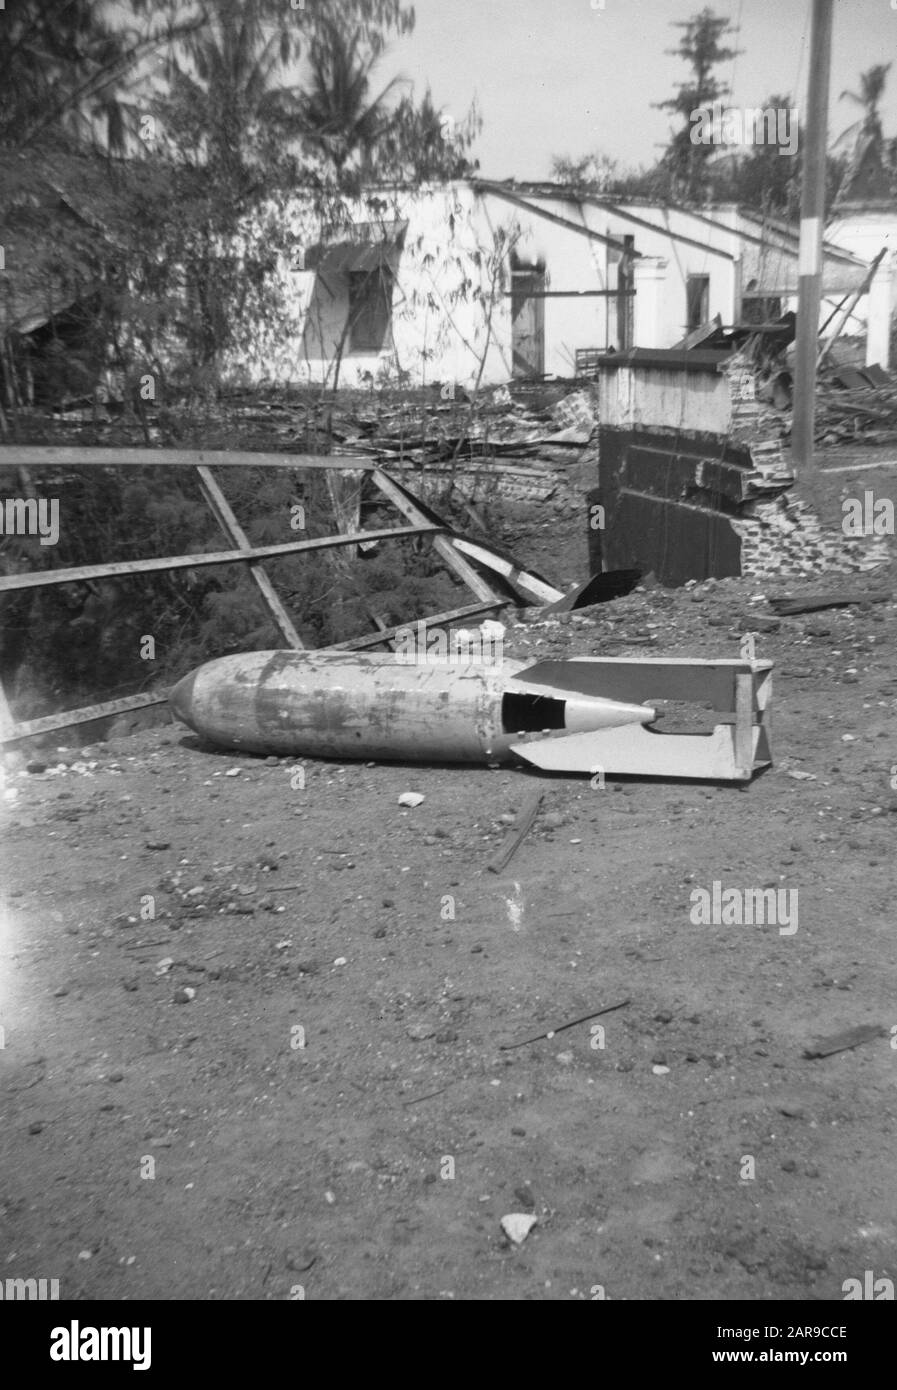 Belongs to art. W.B. Lute. Grässer  Aircraft bomb is unexploded on a bridge Date: August 1947 Location: Indonesia, Dutch East Indies Stock Photo